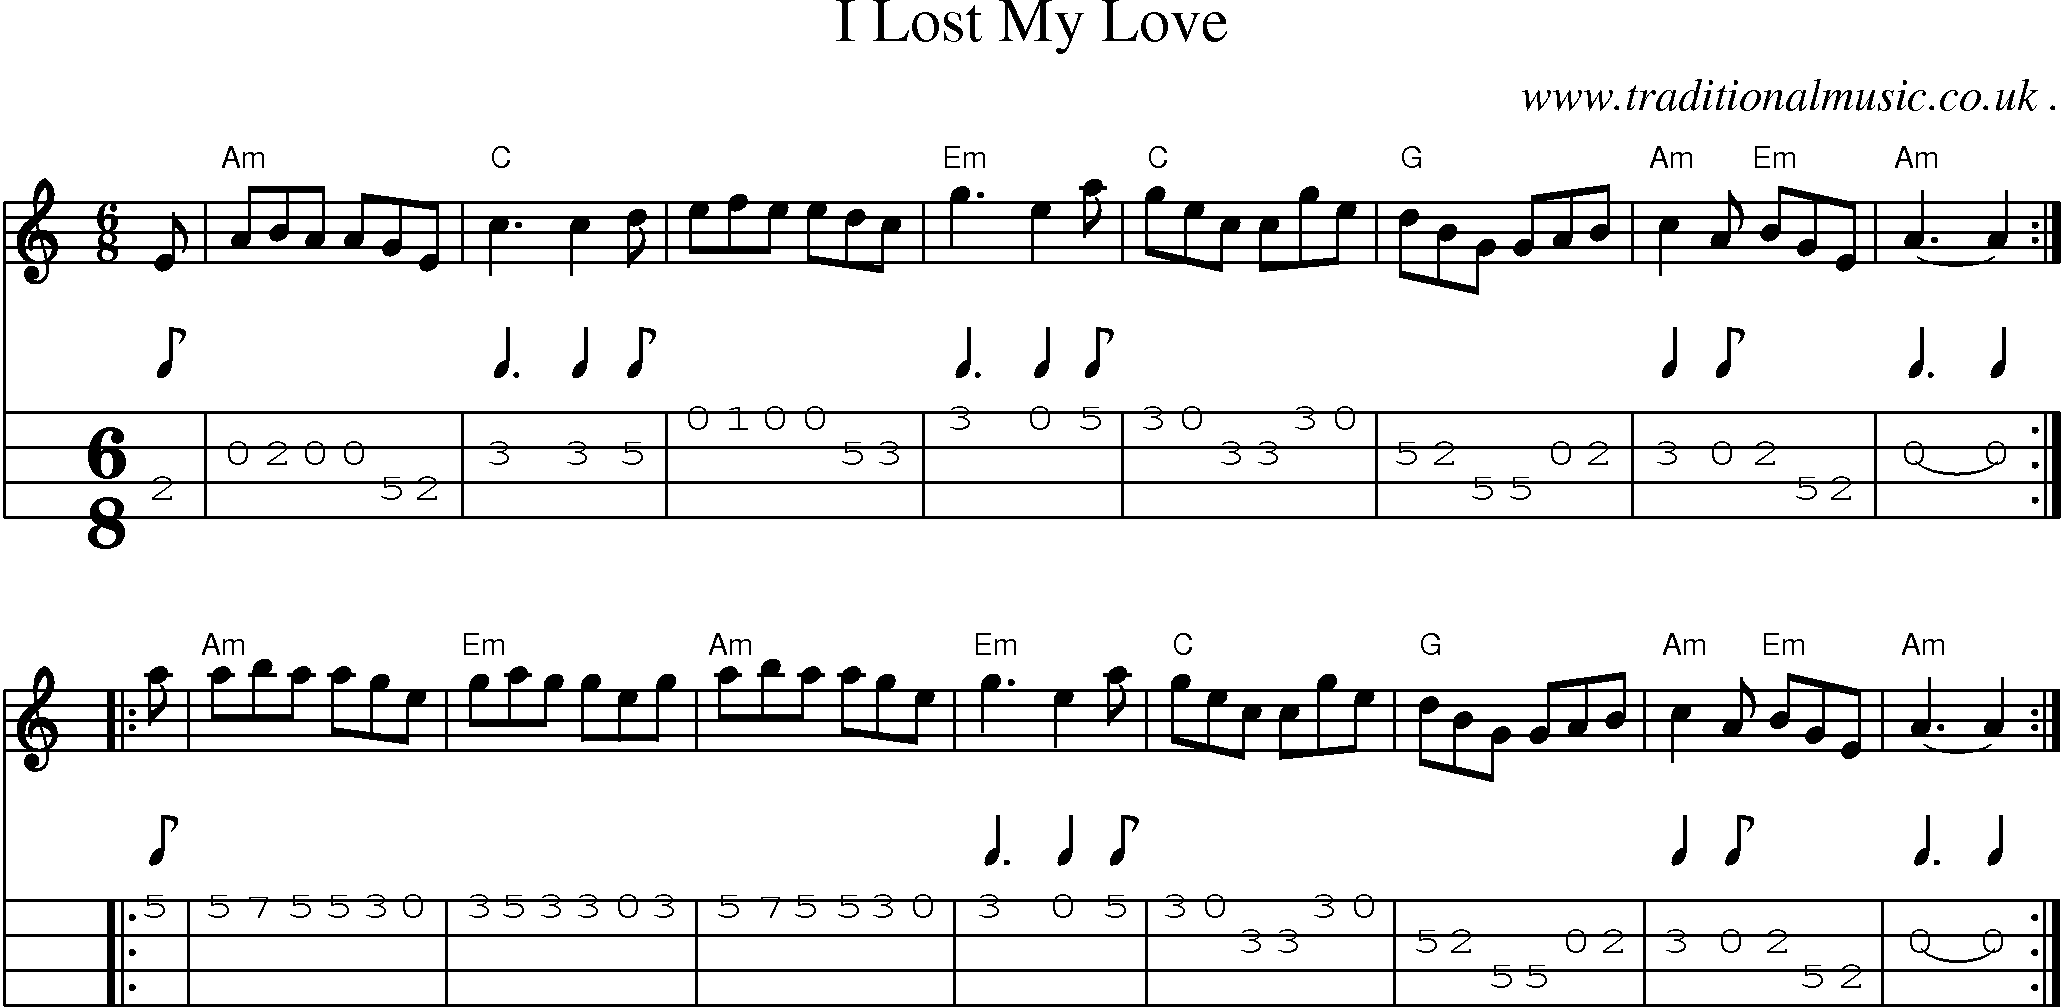 Sheet-music  score, Chords and Mandolin Tabs for I Lost My Love